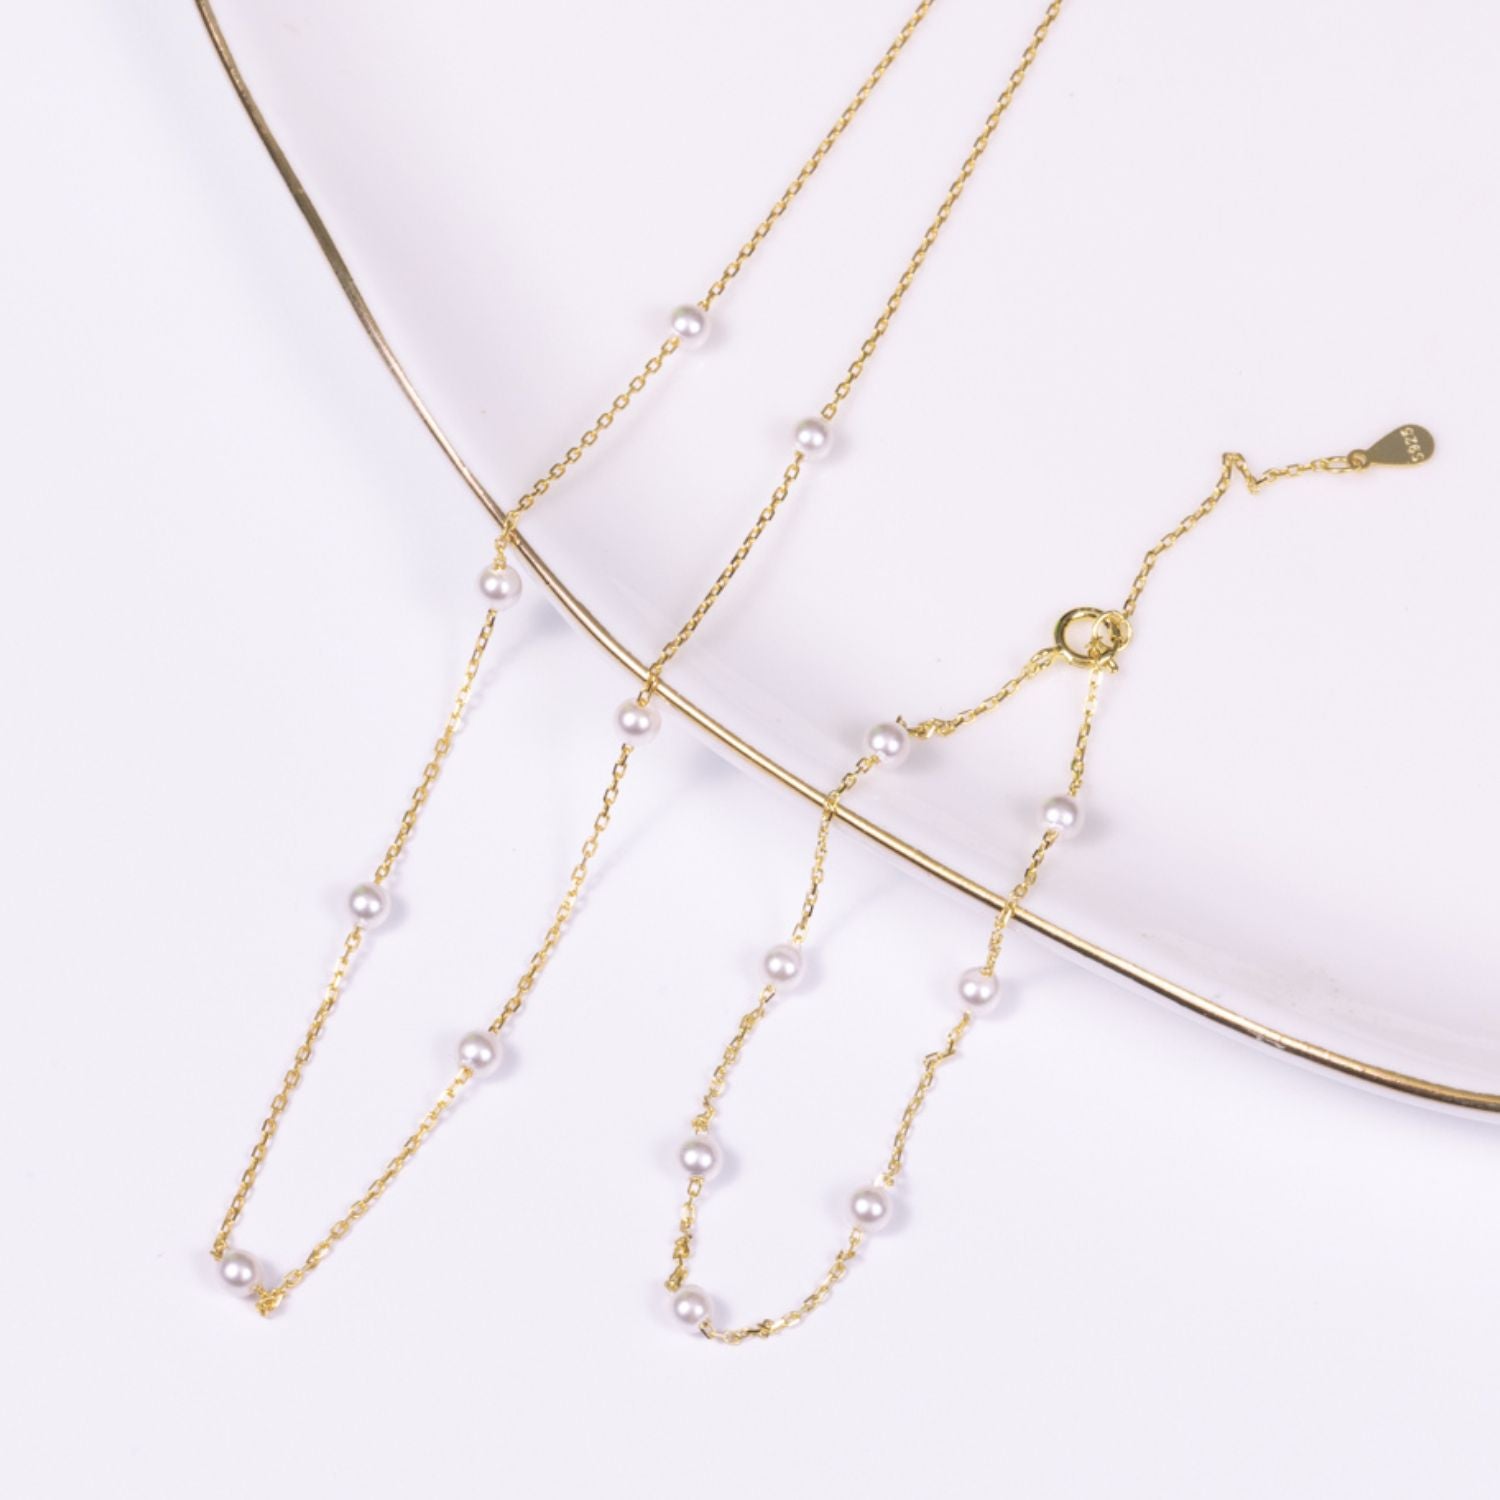 Edwaridian styled Pearl Maala Necklace Sets in 22k Gold GNS 008